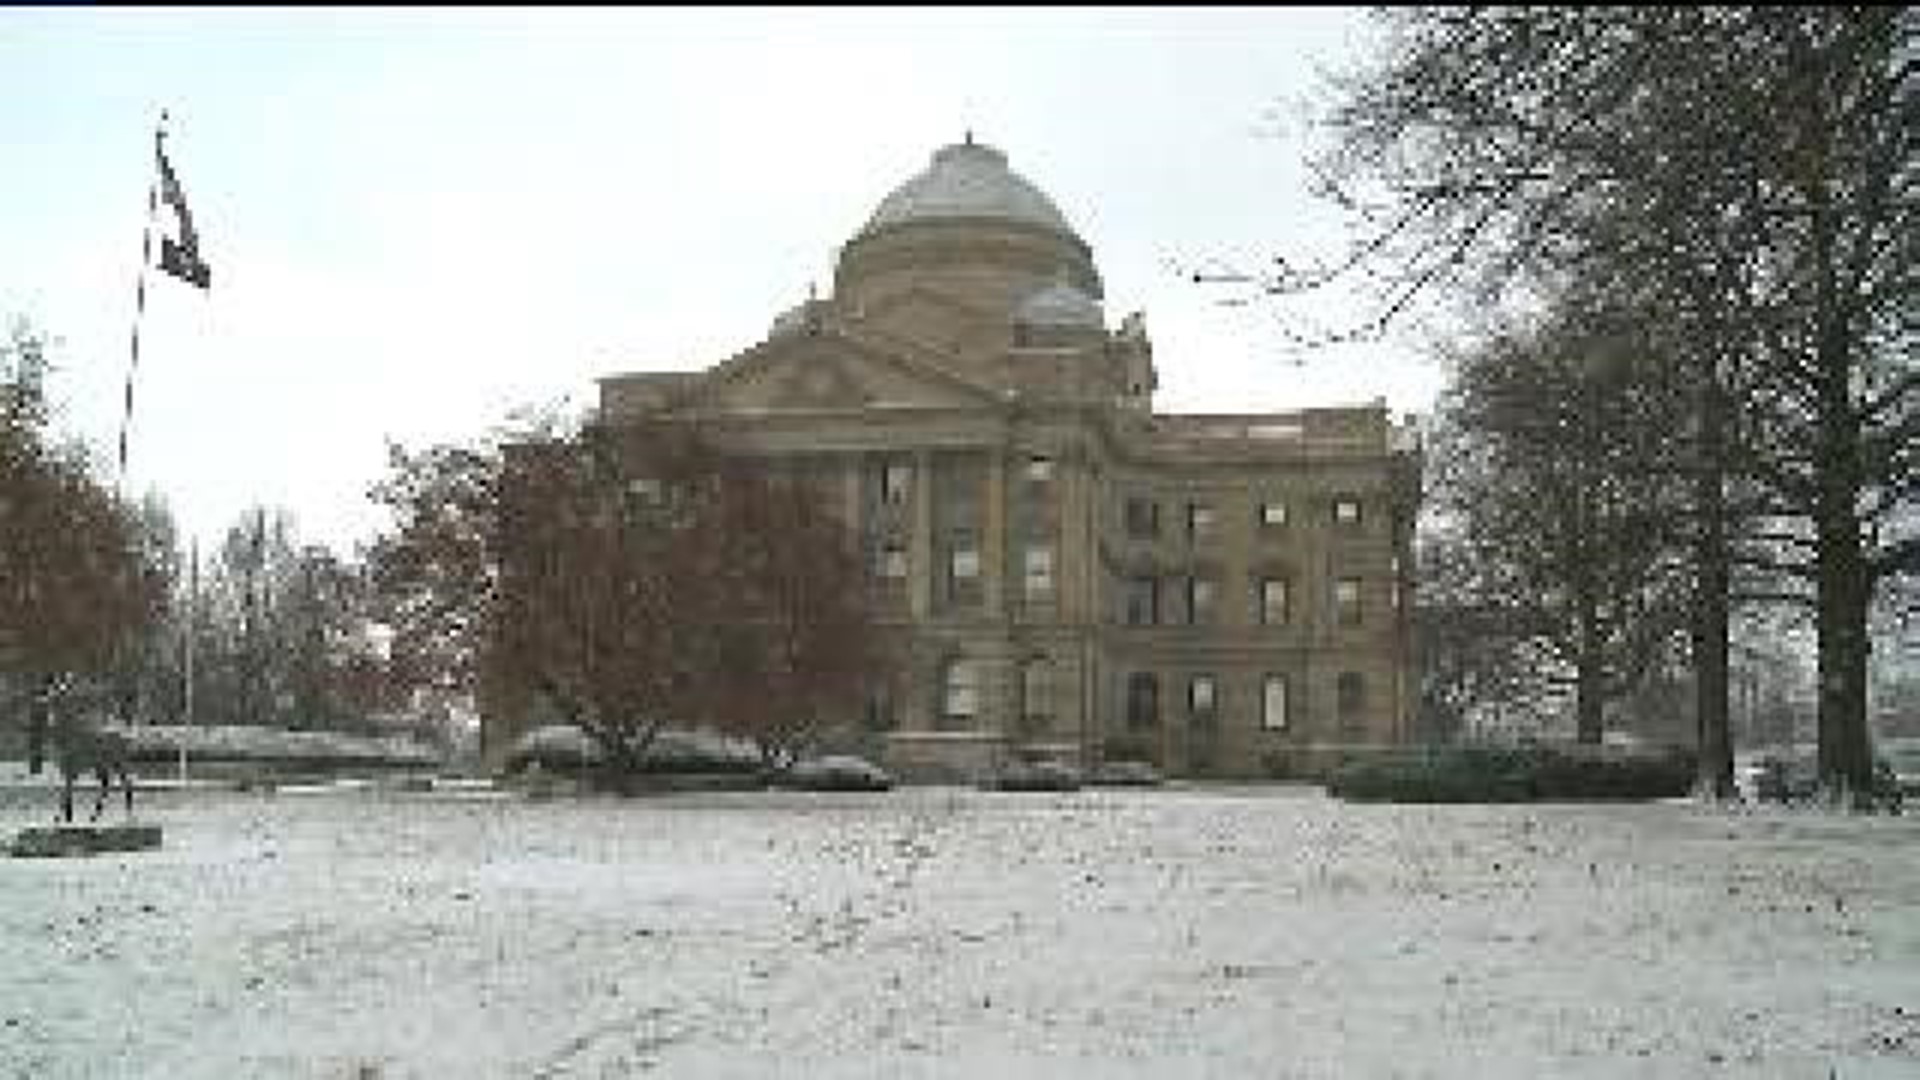 Luzerne County Cuts 22 Jobs on New Year’s Eve